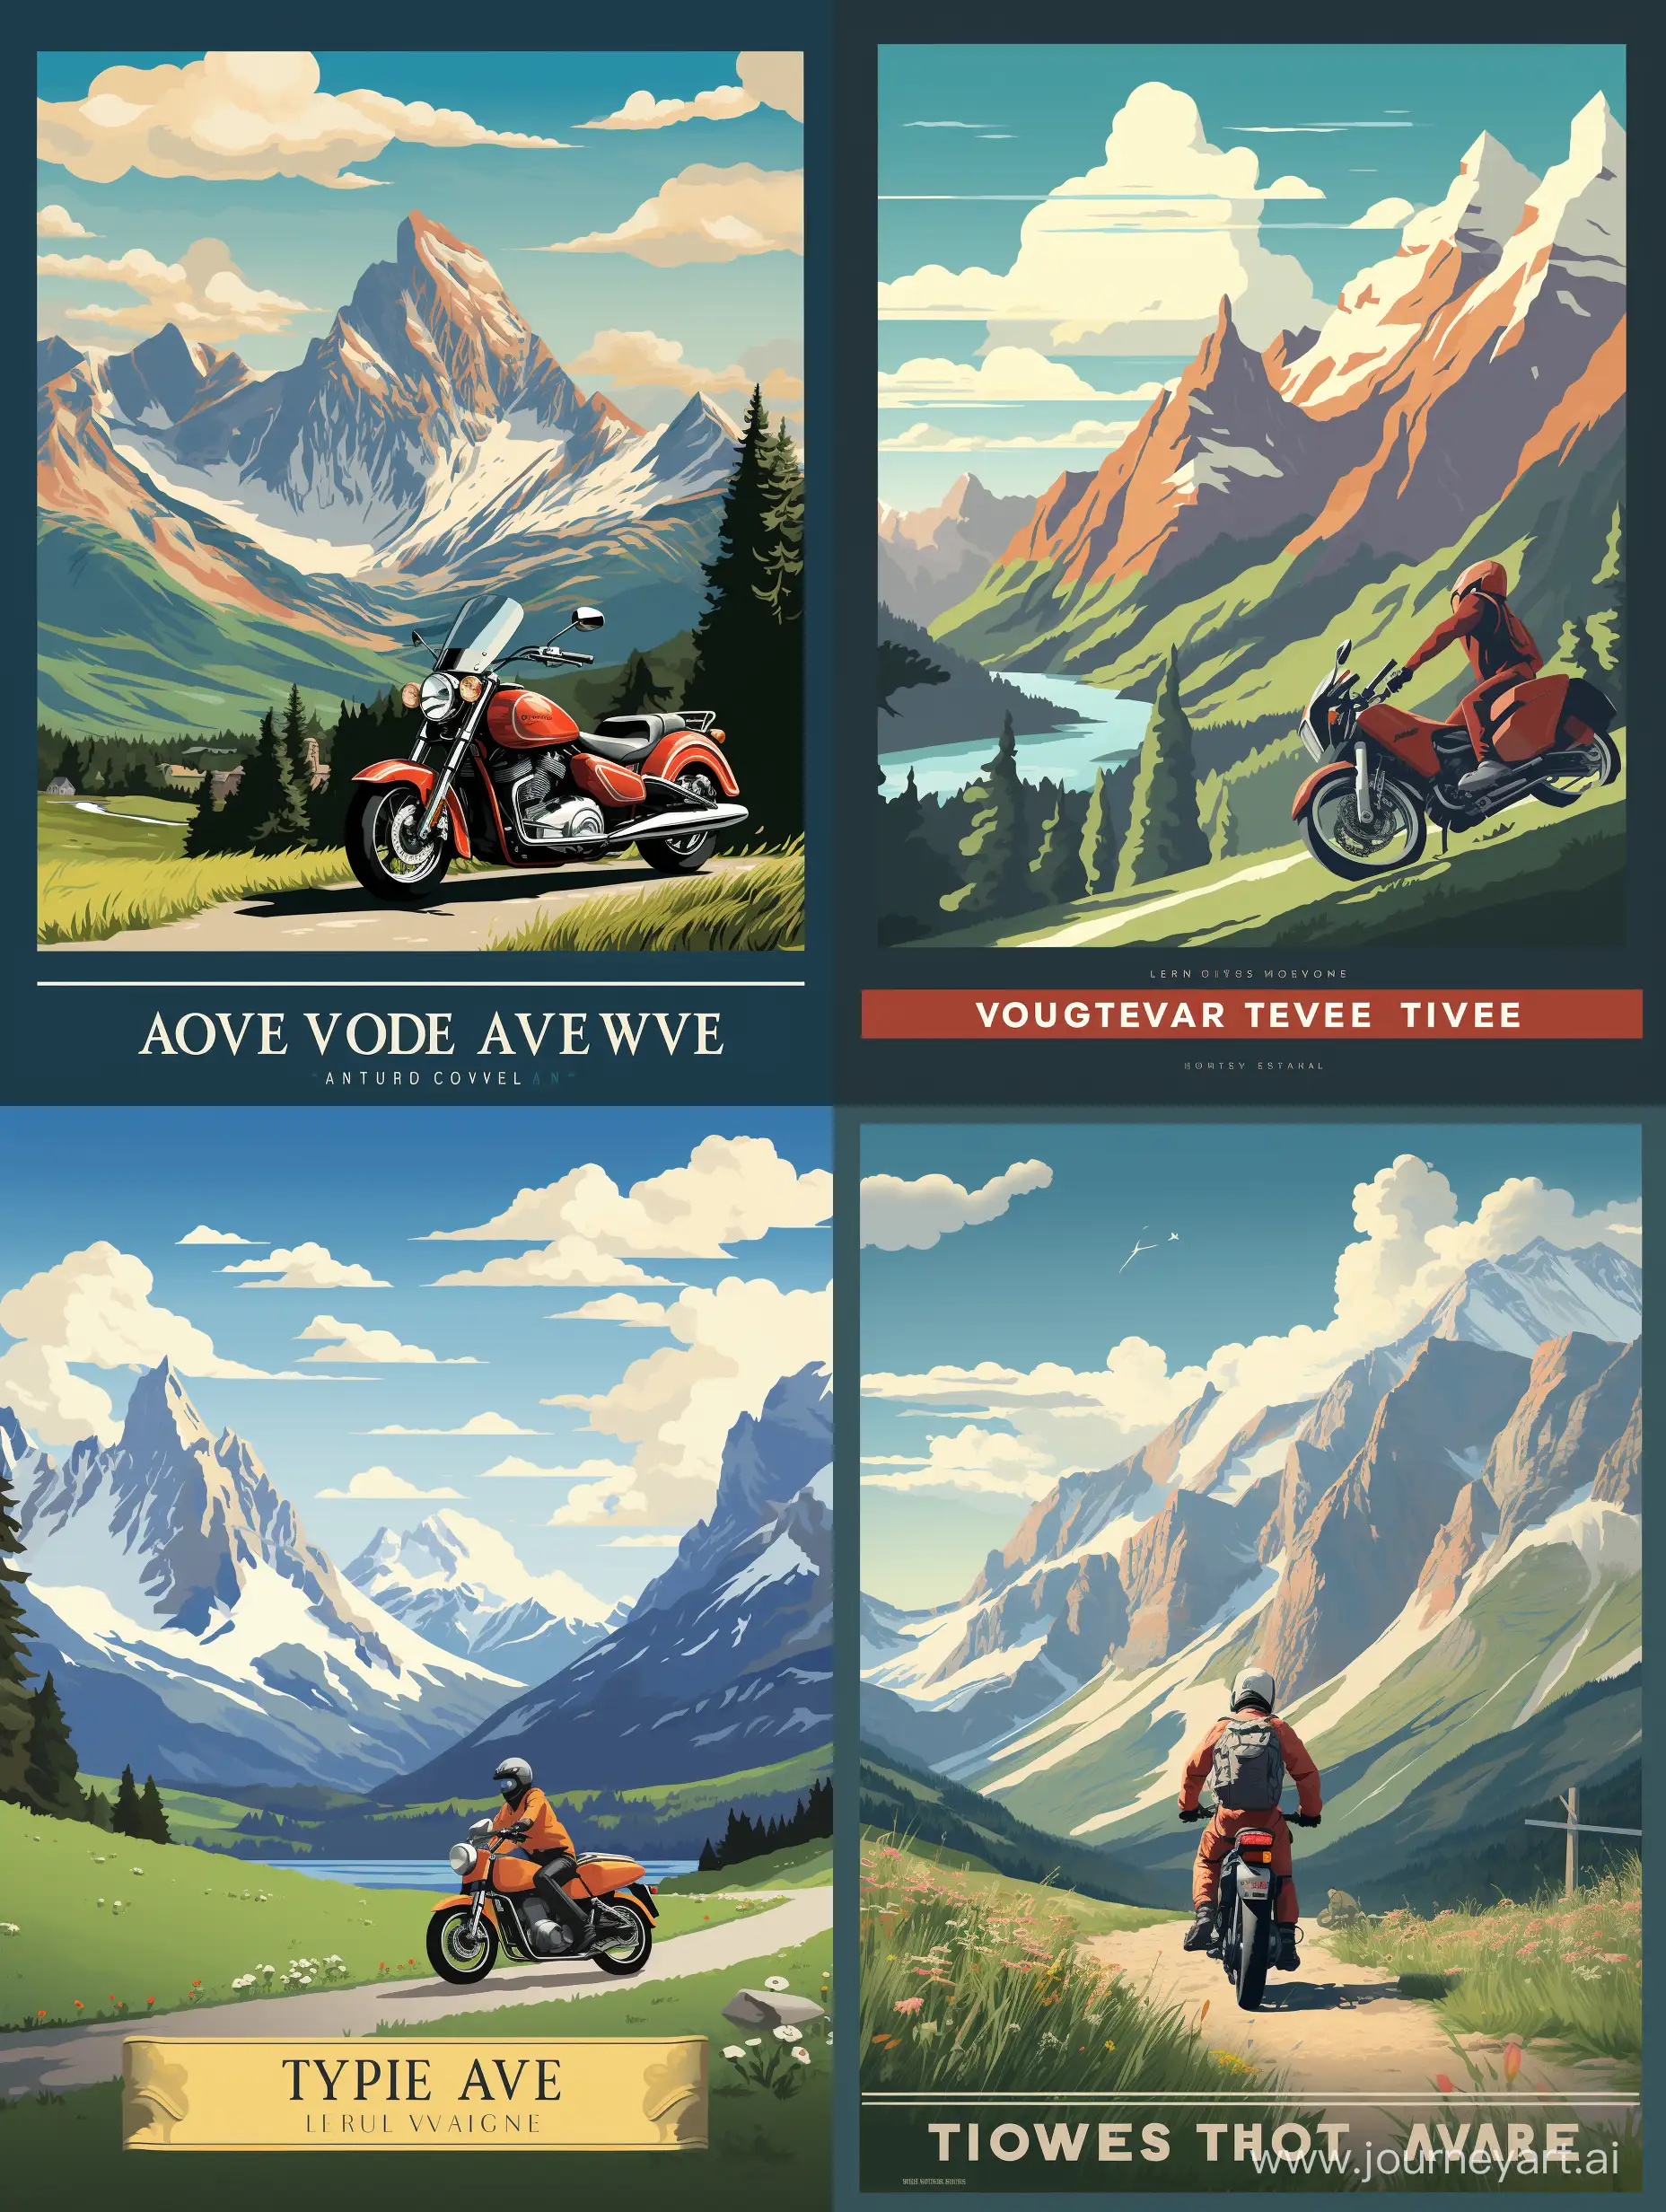 Travel poster featuring motorcycle in Alps by artist Justin Van Genderen, flat vector art illustration, wide angle 